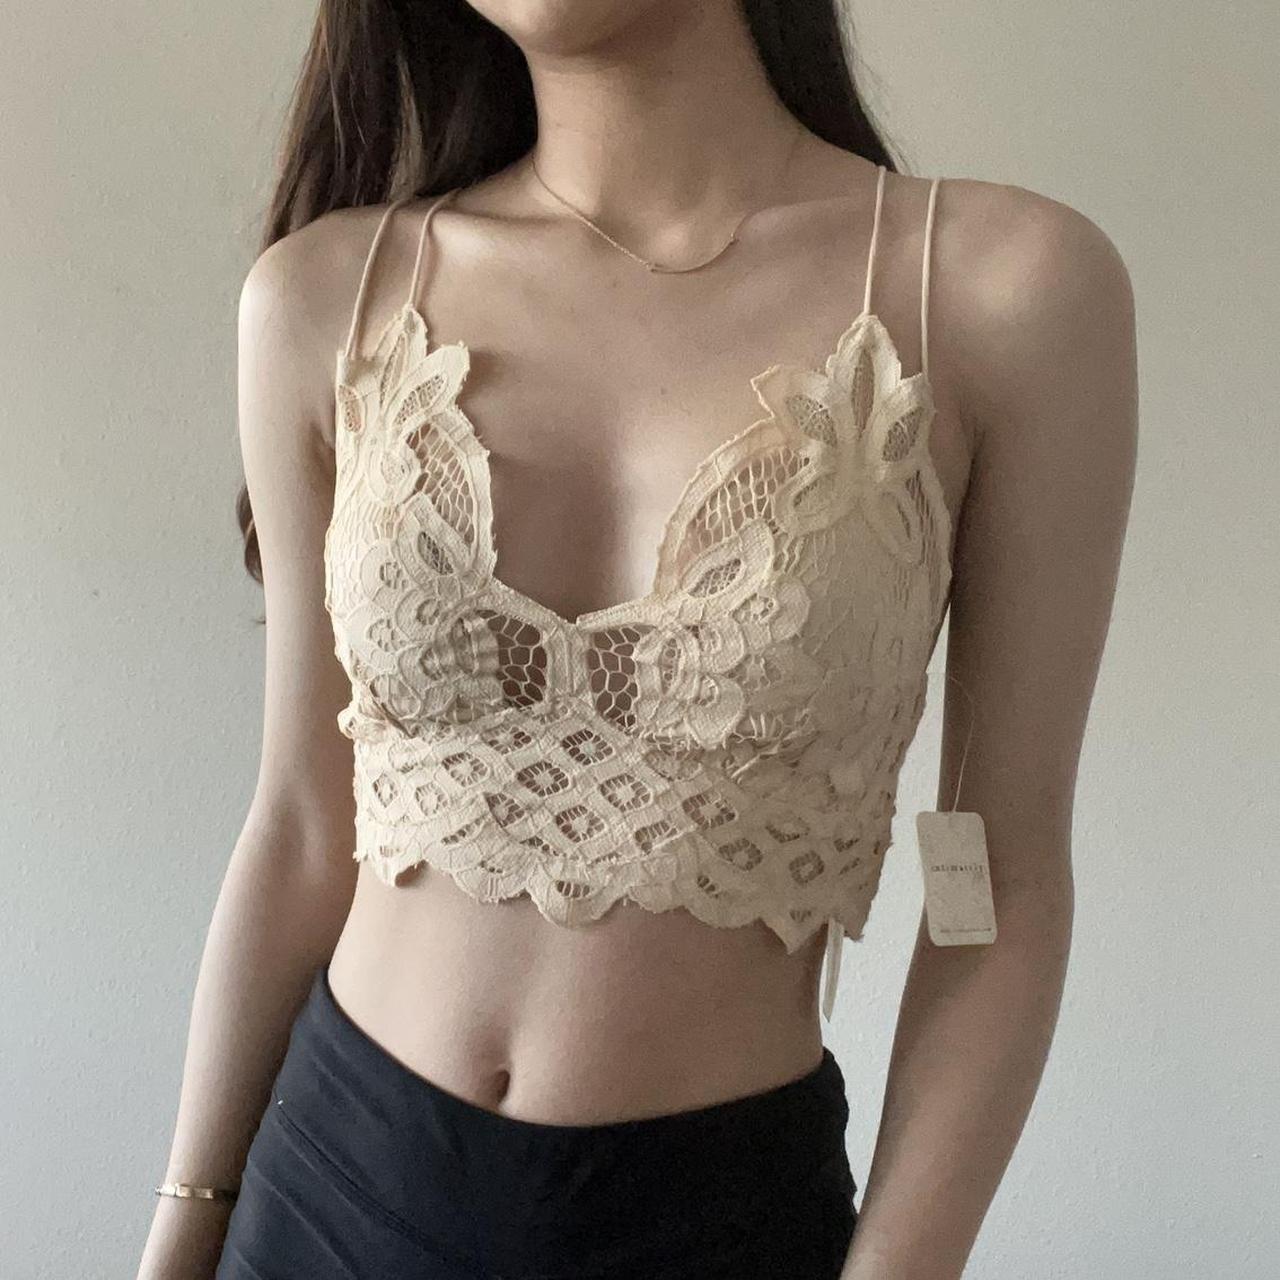 Free People Boho Lace Bralette 🤍 About the - Depop